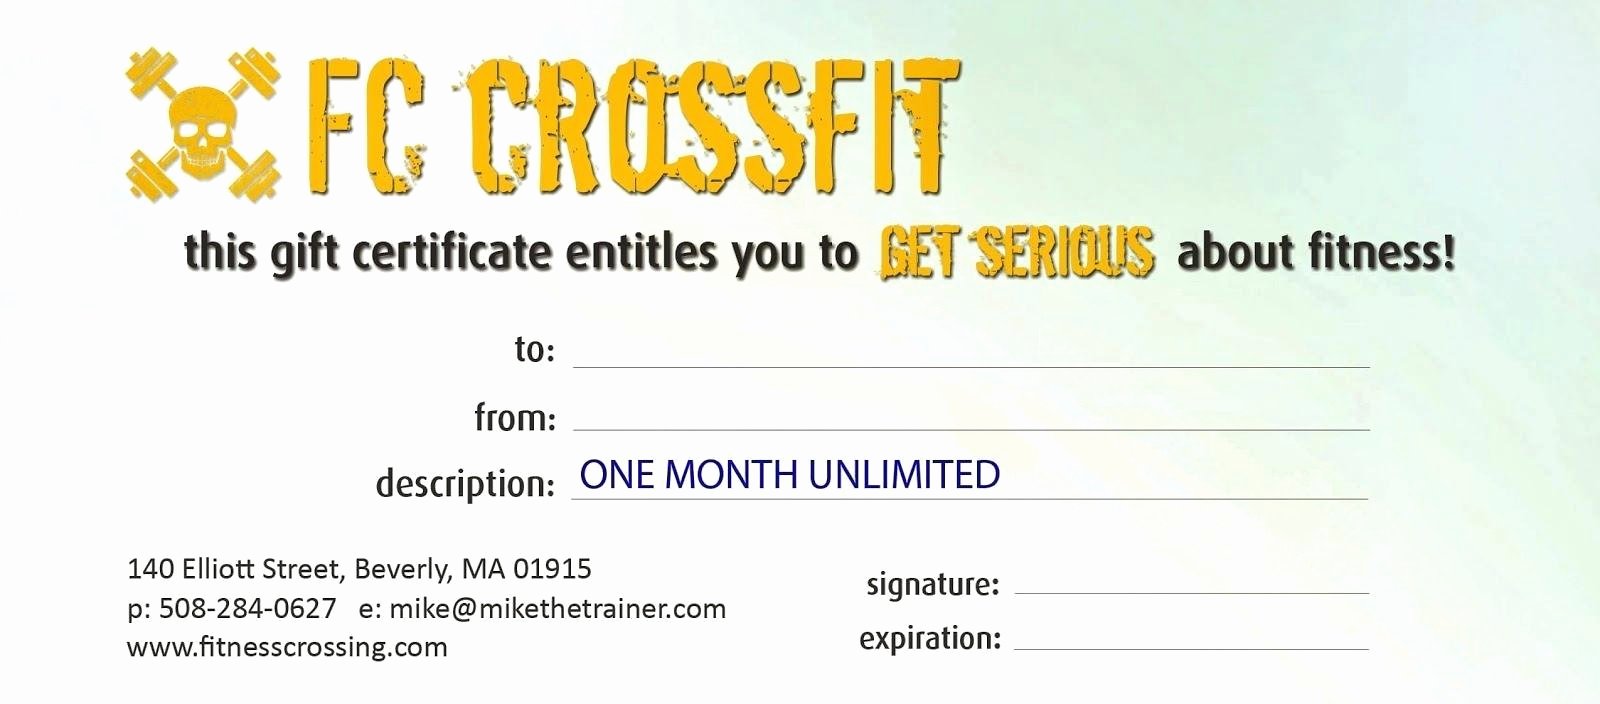 Personal Training Gift Certificate Template Beautiful Fitness Gift Certificate Template Image – Free Personal